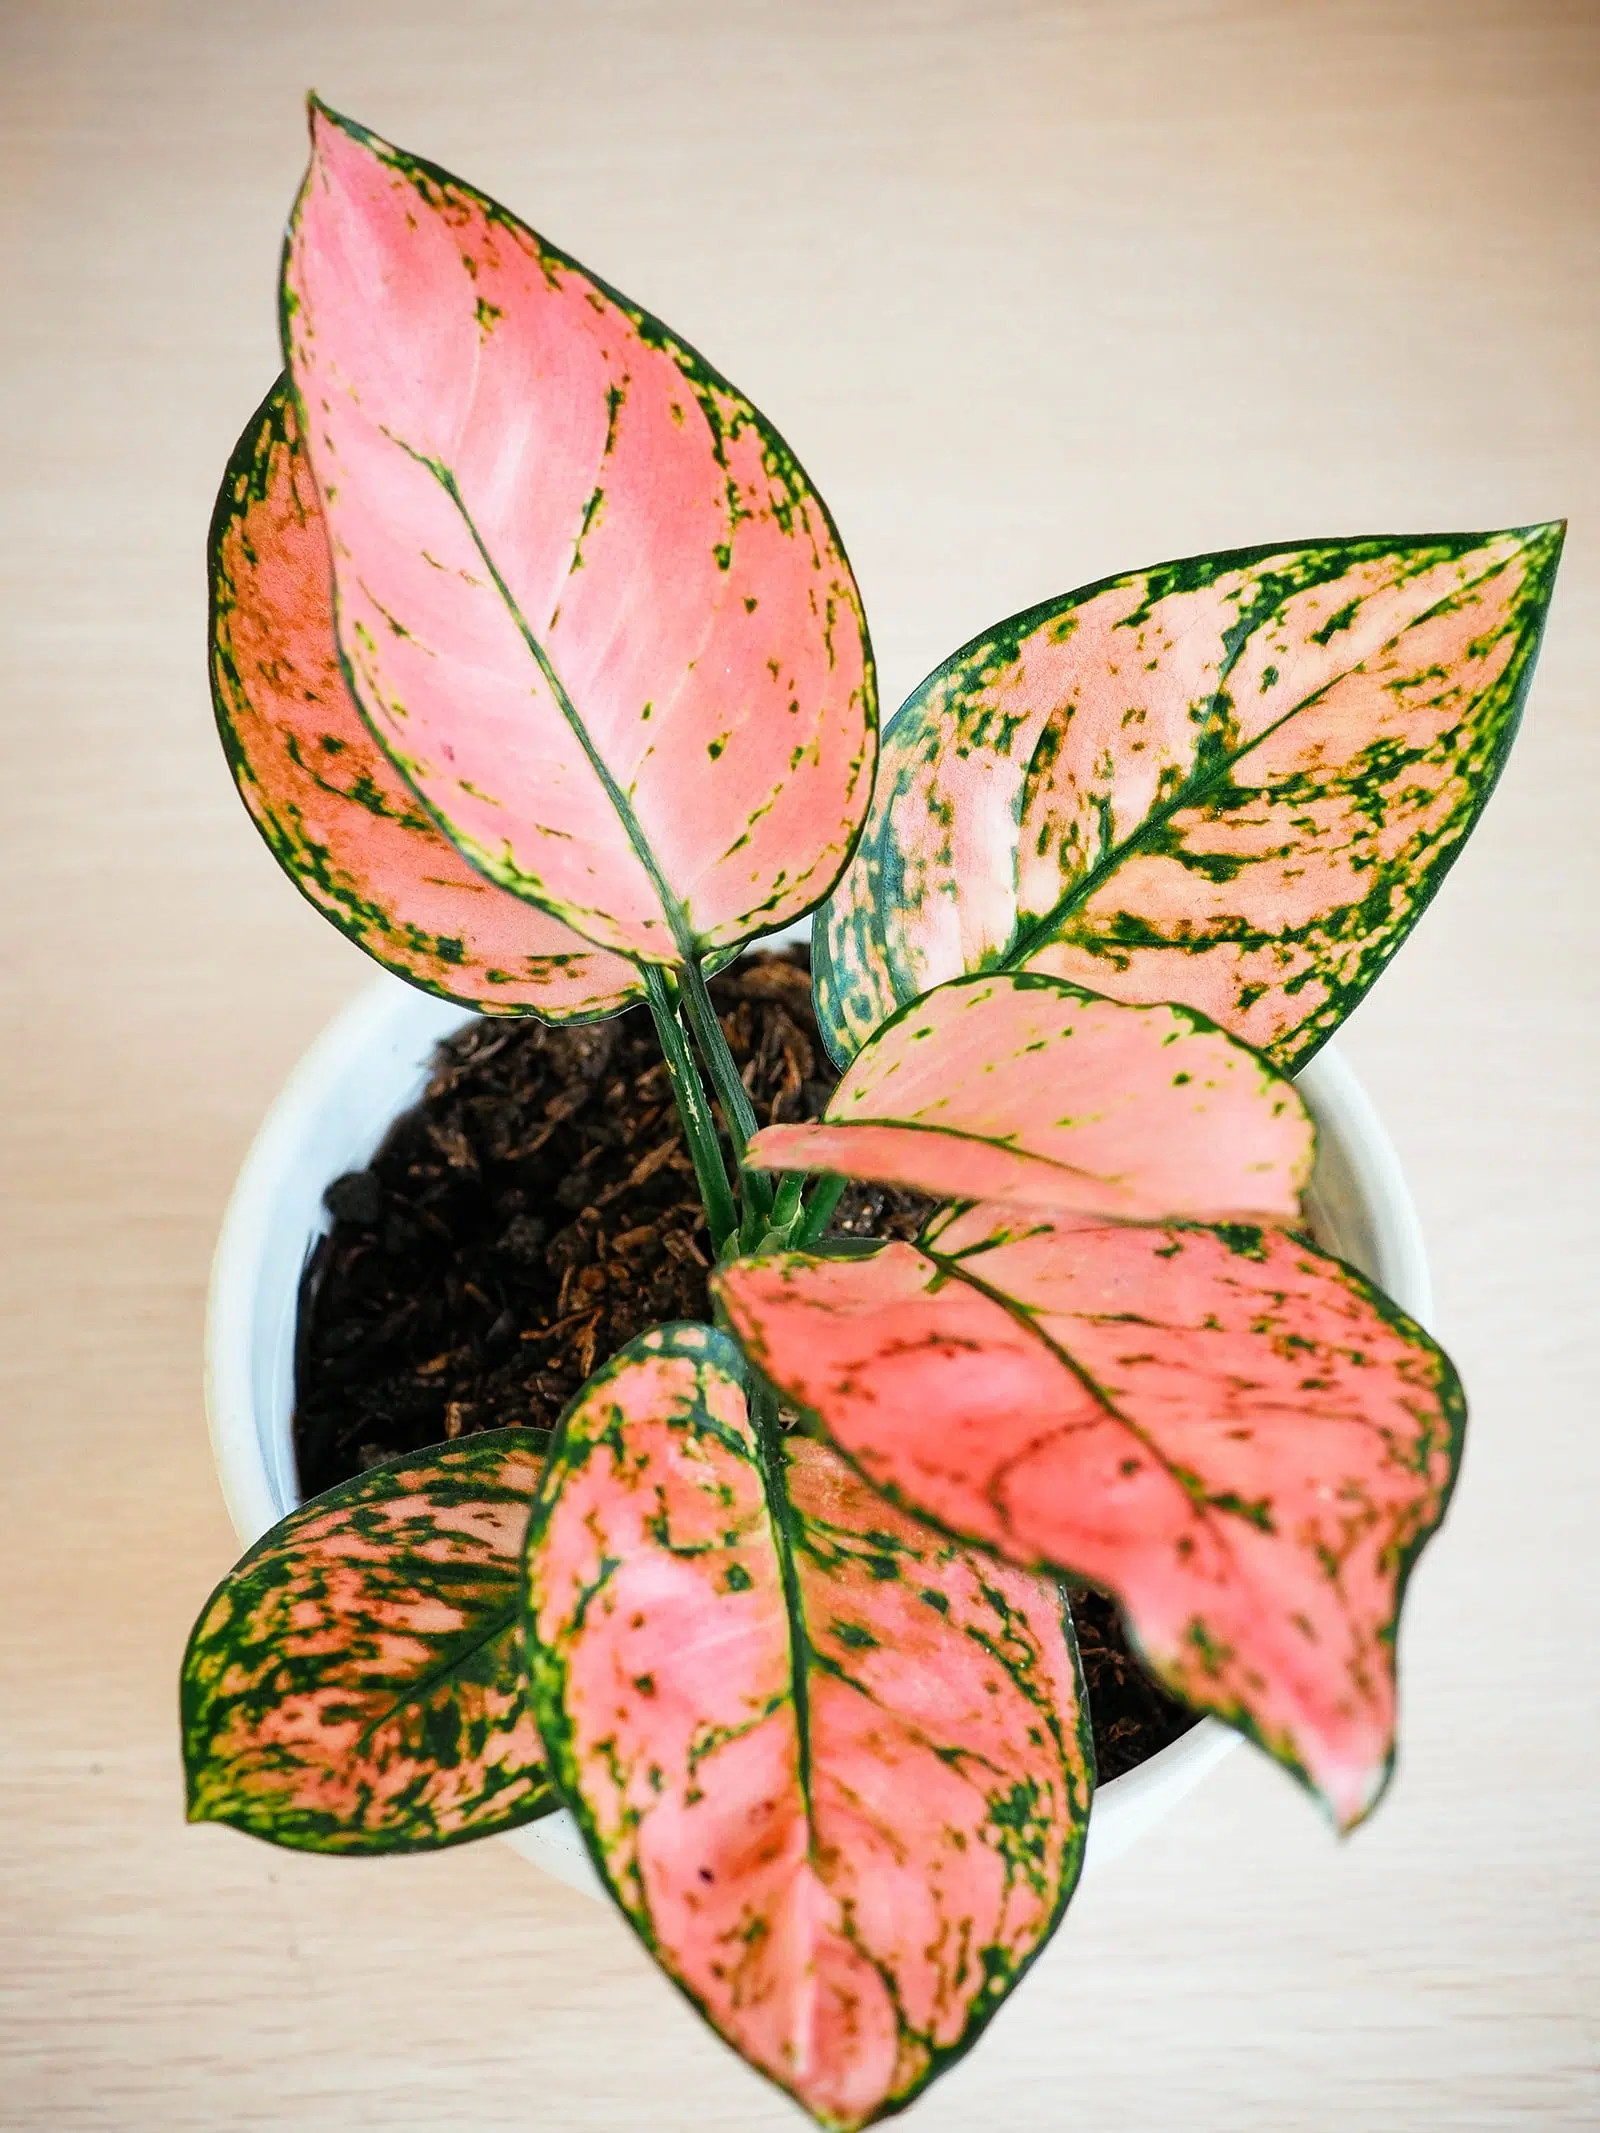 Aglaonema Varieties To Swoon Over: 35 Stunning Chinese Evergreen